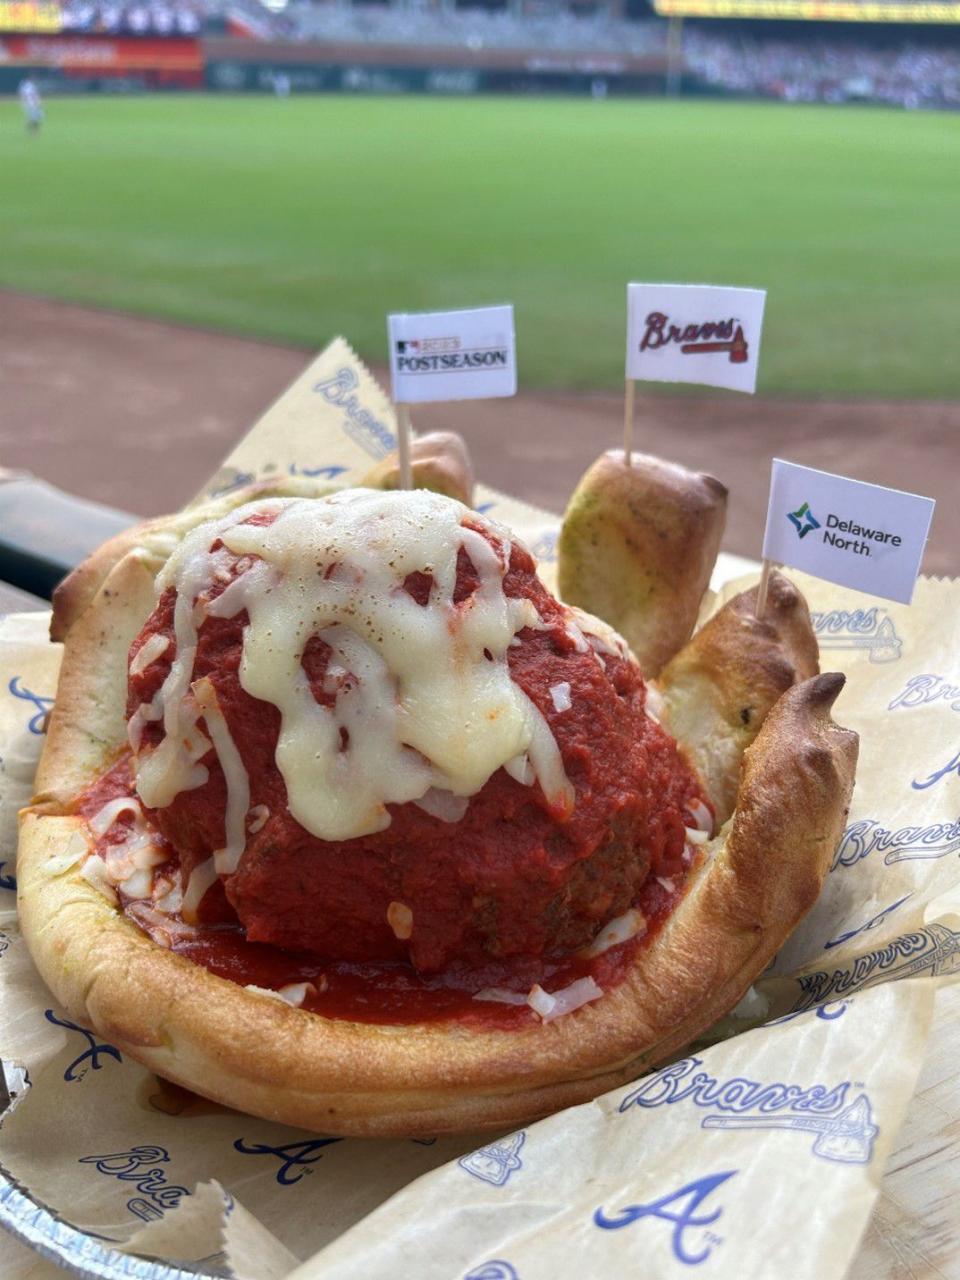 •	Whole ‘Nother Ball Game: Gigantic all-beef Italian meatball braised in San Marzano pomodoro sauce for 2 hours, topped with fresh mozzarella cheese and sauce nuzzled in a glove-inspired bread bowl lightly brushed with basil pesto sauce and extra virgin olive oil. Available at 1871 Grille near section 113.